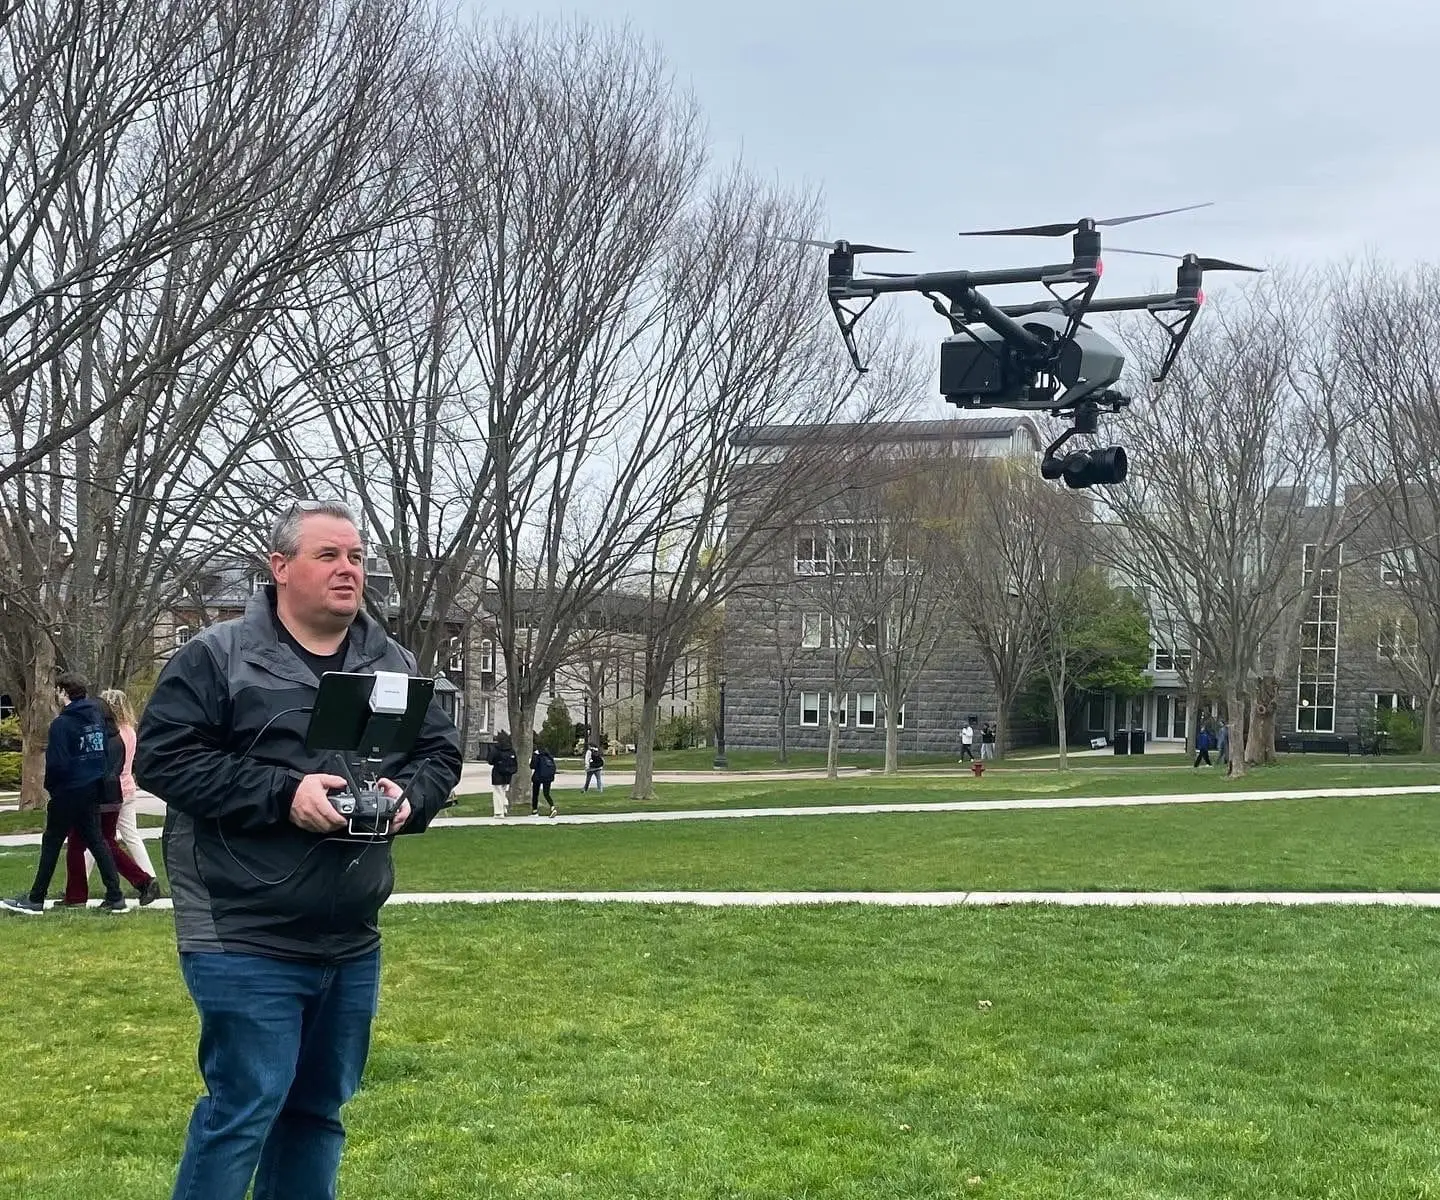 Rhode Island Drone operator Sean McVeigh flying a drone for photography and video drone work at the University of Rhode Island